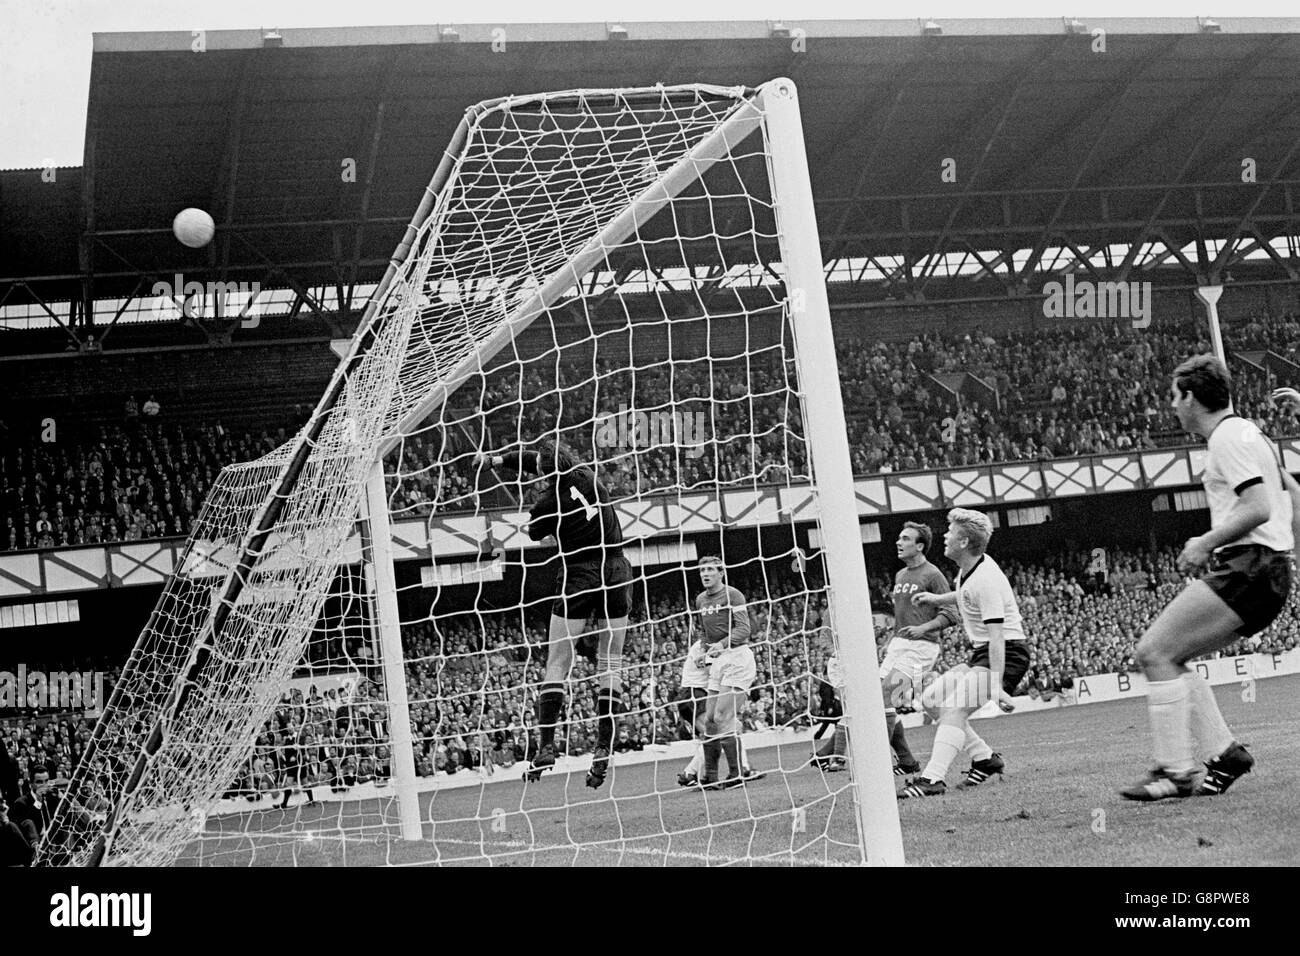 Soccer - World Cup England 1966 - Semi Final - West Germany v USSR - Goodison Park Stock Photo